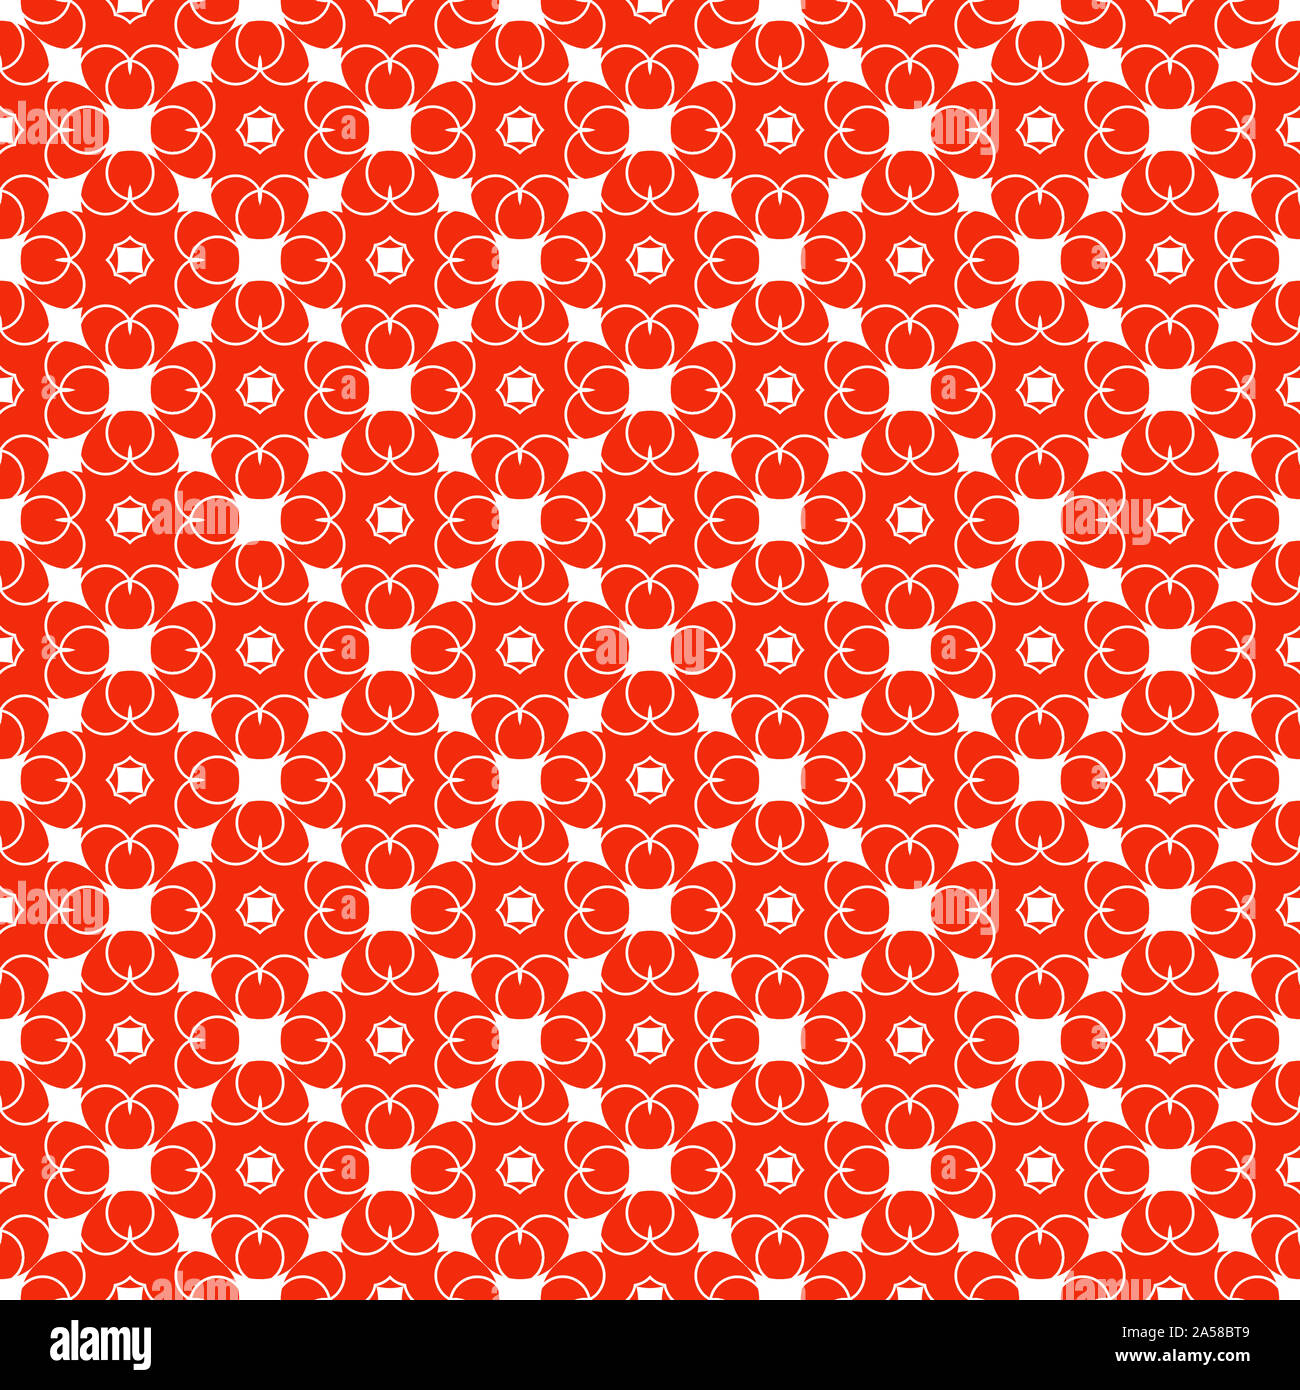 Seamless geometric pattern. Design background with template for web pages, wallpaper, print, furniture, cloth, digital, packaging, objects, banner. Stock Photo